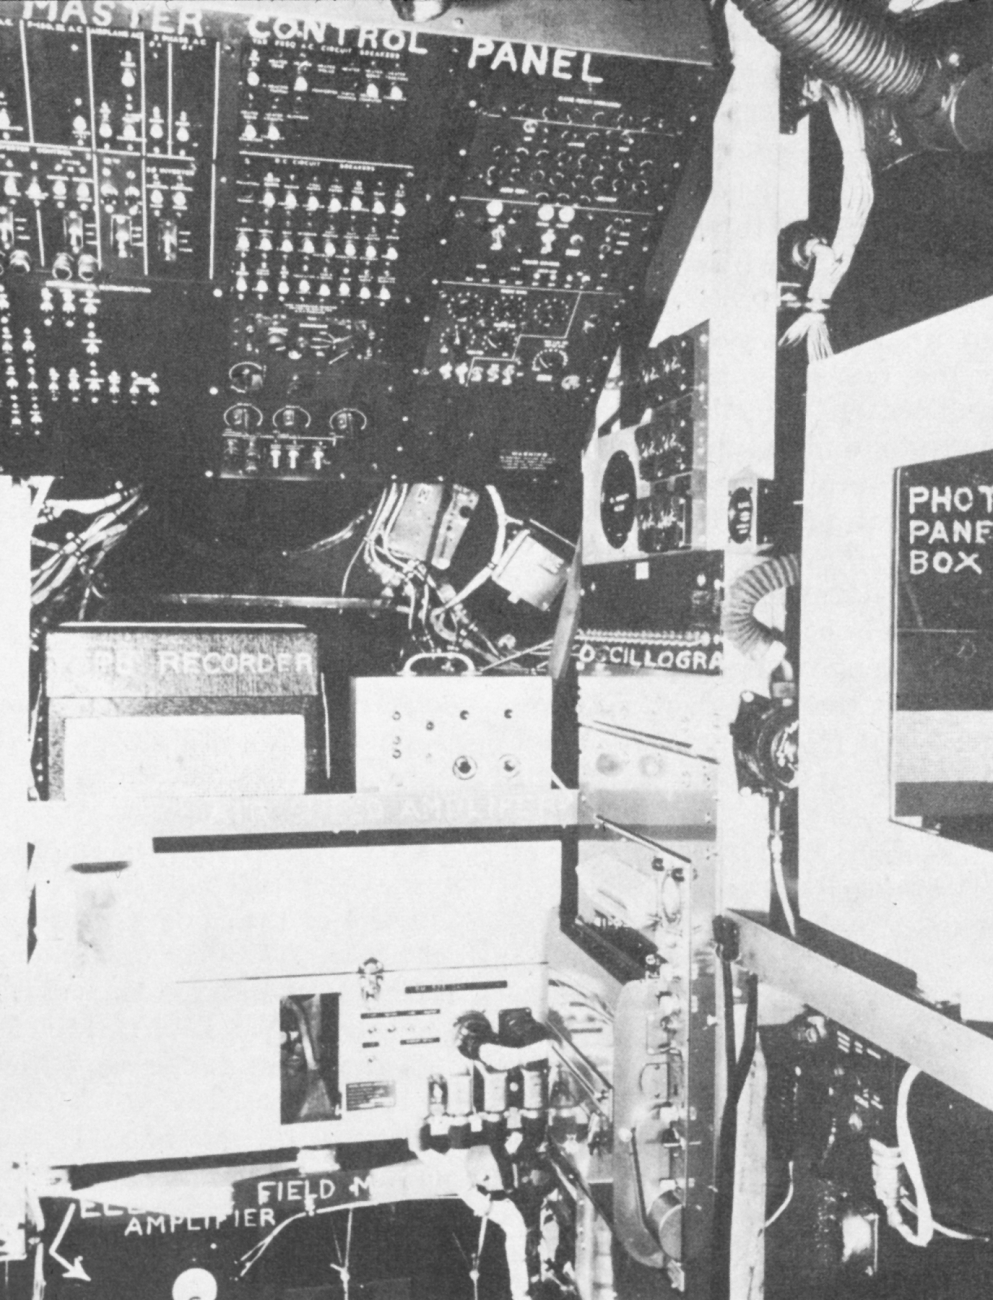 Technicians position in the B-50, an Air Force aircraft loaned to the WeatherBureau for hurricane research